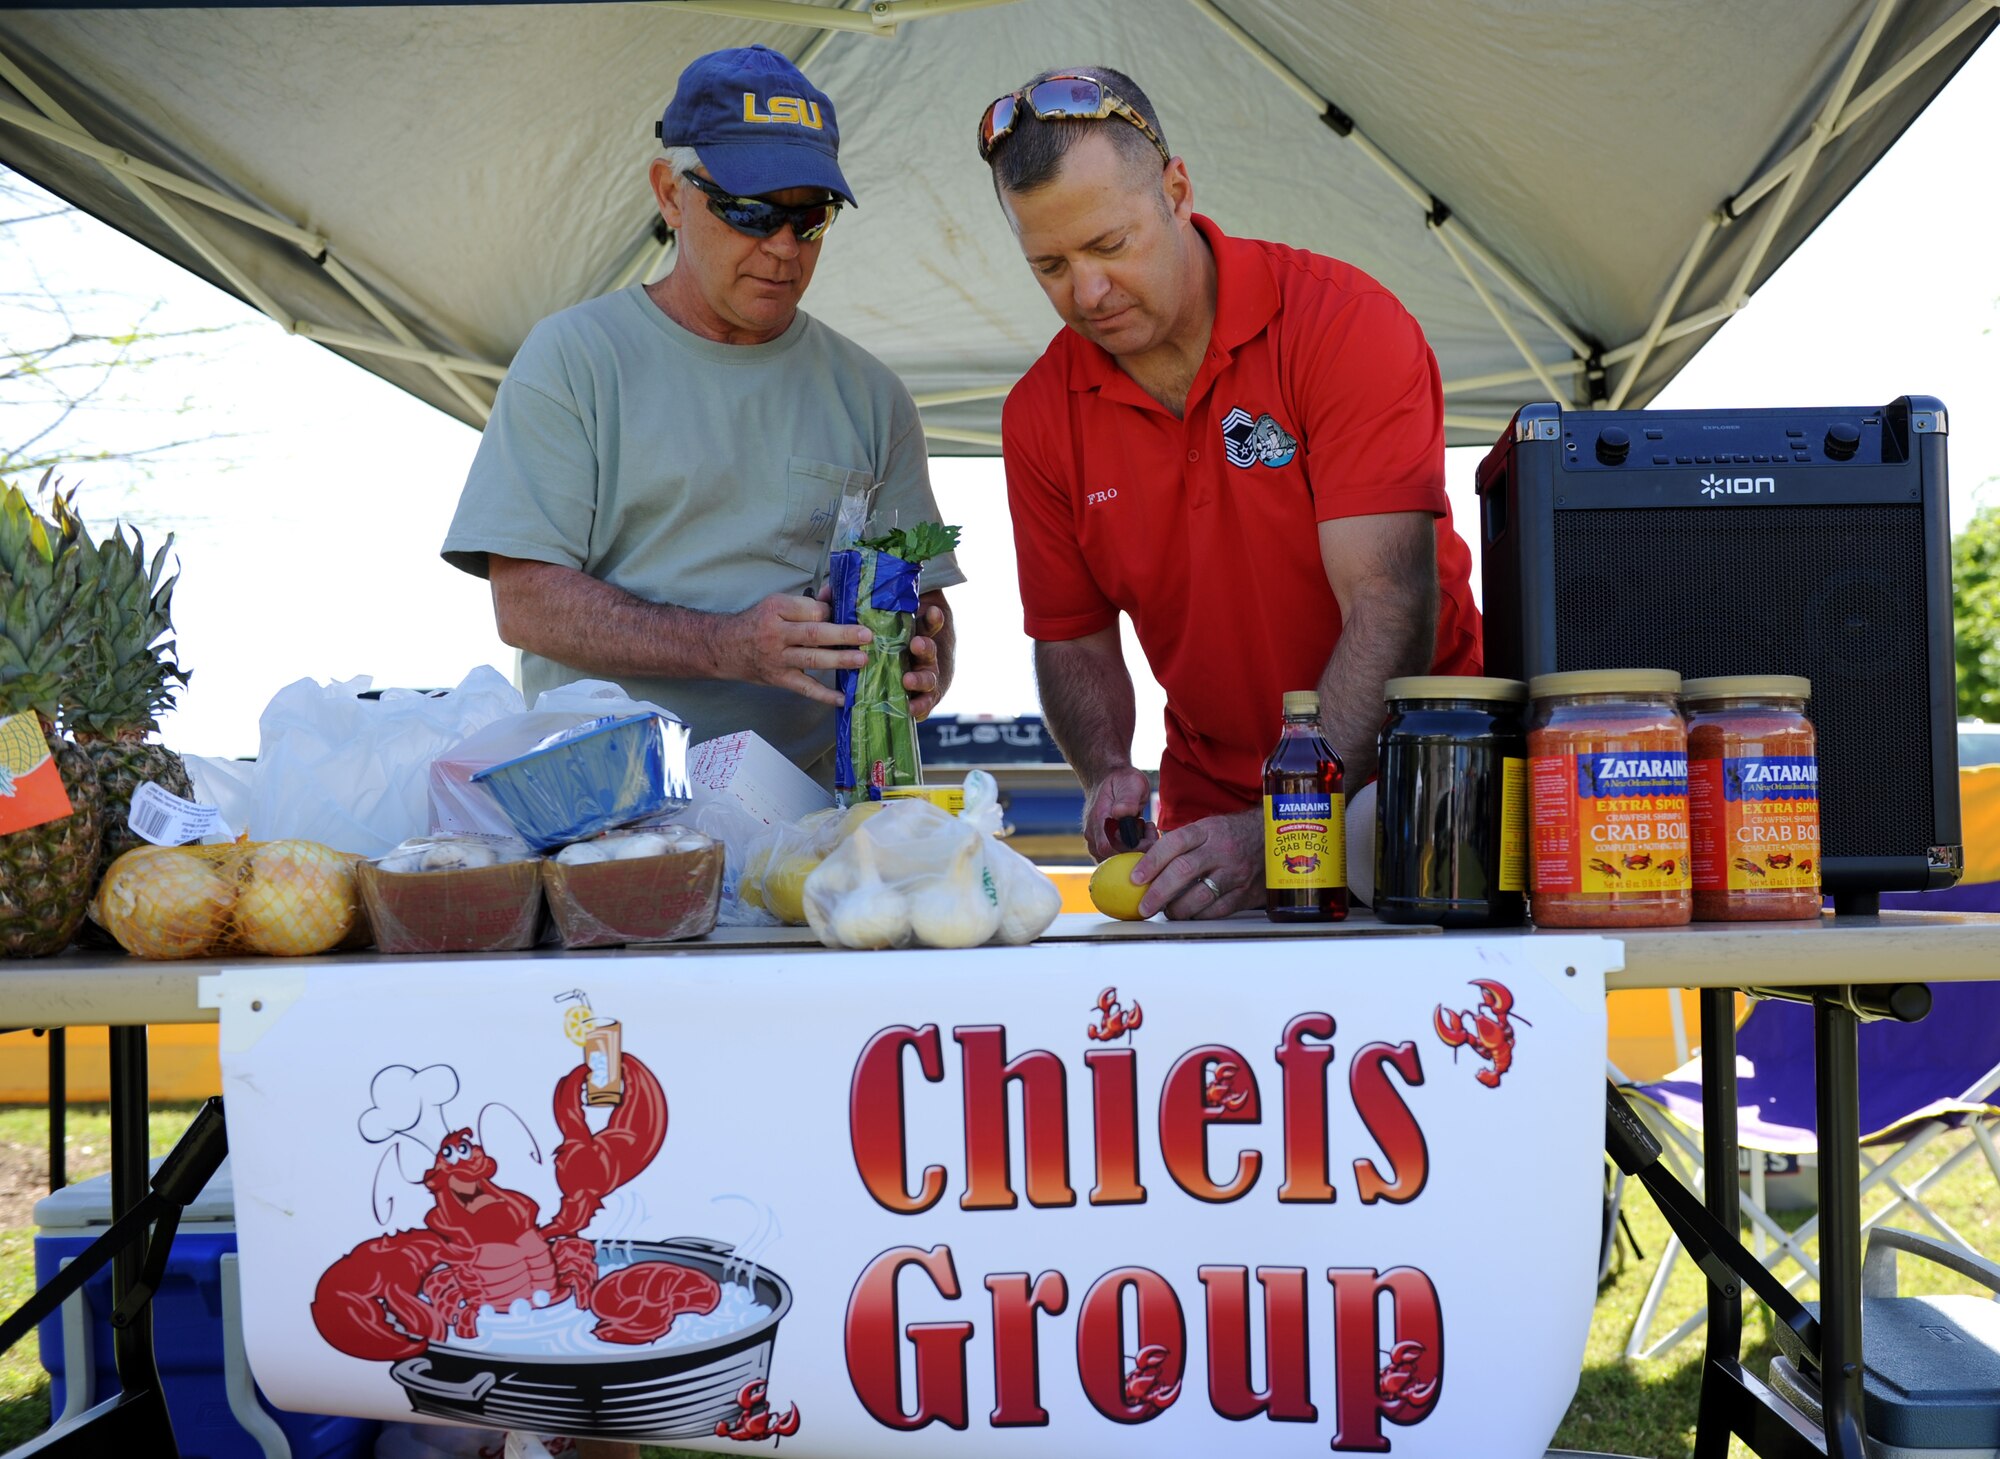 The “Chiefs Group” team members, Mike Gulino 338th Training Squadron course development manager, and Chief Master Sgt. Derek Fromenthal, 338th TRS superintendent, prepare the ‘fixins’ for their crawfish during the 4th Annual Bay Breeze Crawfish Cook-Off at the Bay Breeze Event Center April 8, 2016, Keesler Air Force Base, Miss. The “Bug Smugglers” won the cook-off and decided to gift the trophy and the prize to the second place team, “Kajun Perfection”. “Kajun Perfection” will receive a free entry into the 24th Annual Mississippi Coast Coliseum Crawfish Festival Cook-Off. (U.S. Air Force photo by Kemberly Groue)